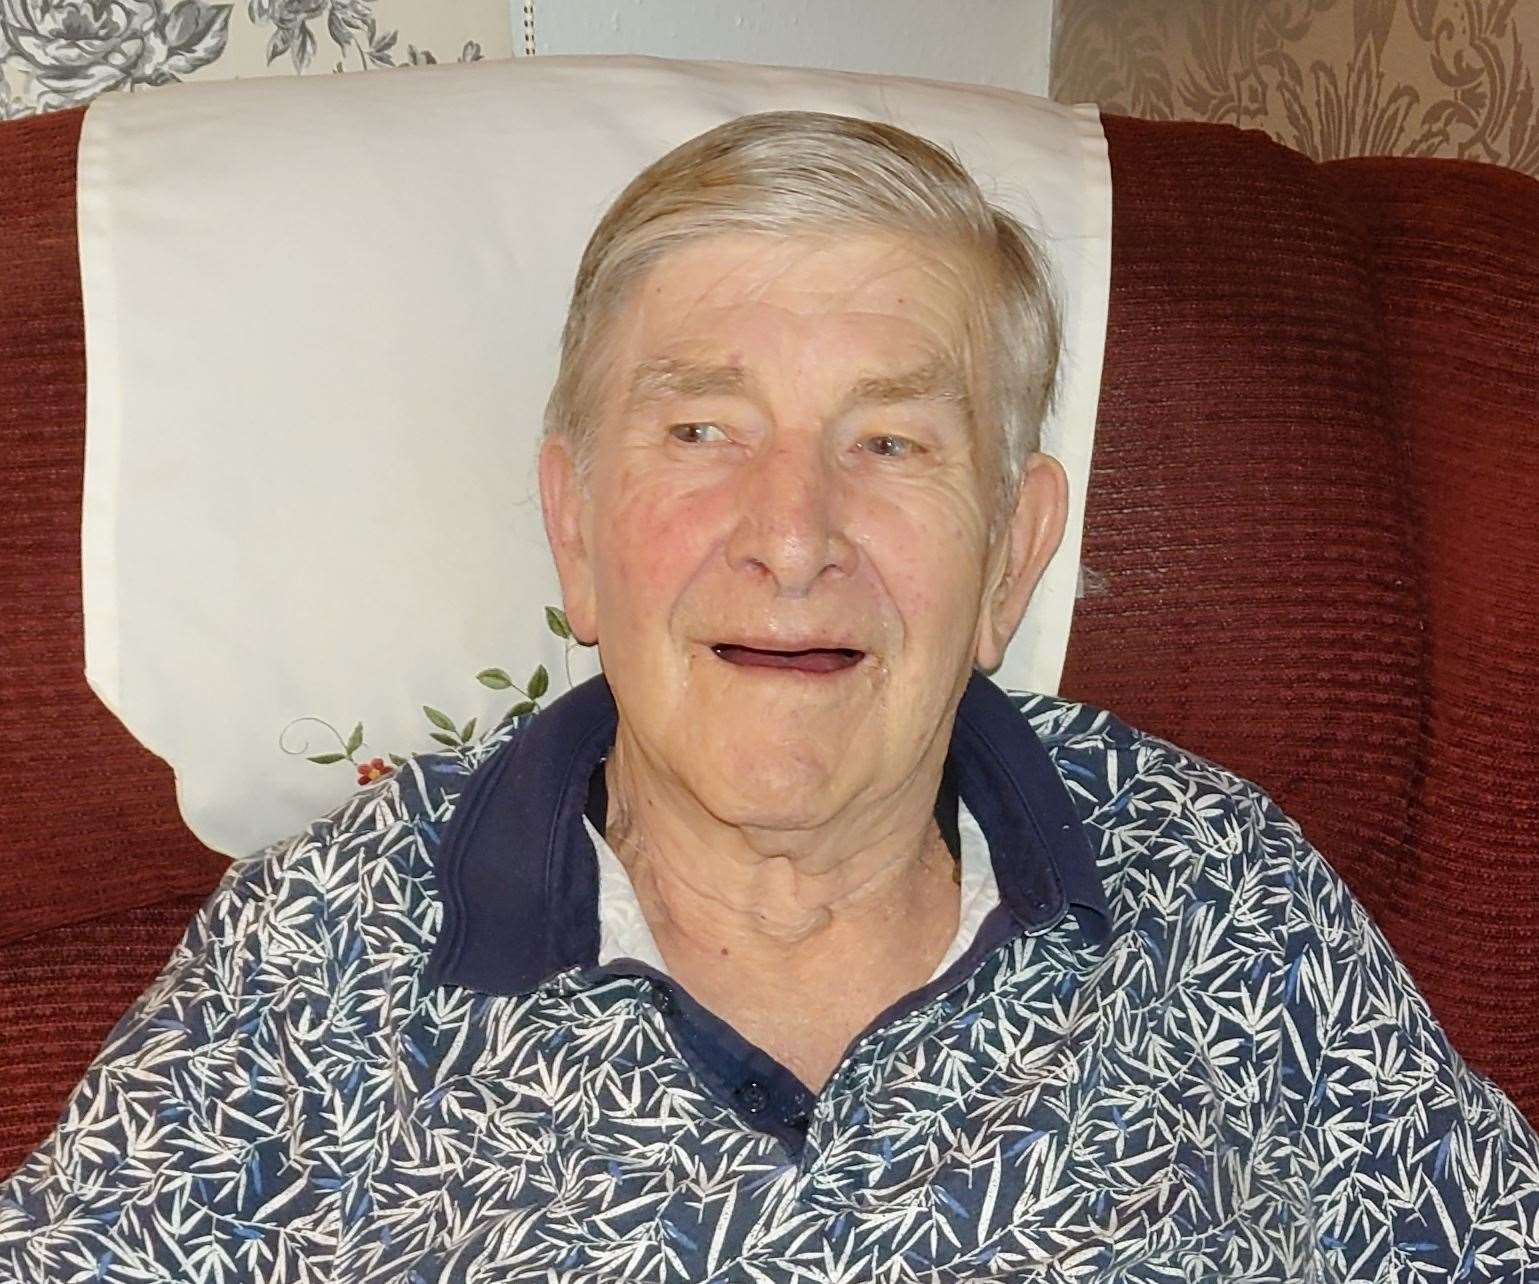 Brian Hooker, 86, fell while walking home to Chatham after giving up on a 15-hour wait in the A&E department at Medway Maritime Hospital. Picture: Lawrence Hooker